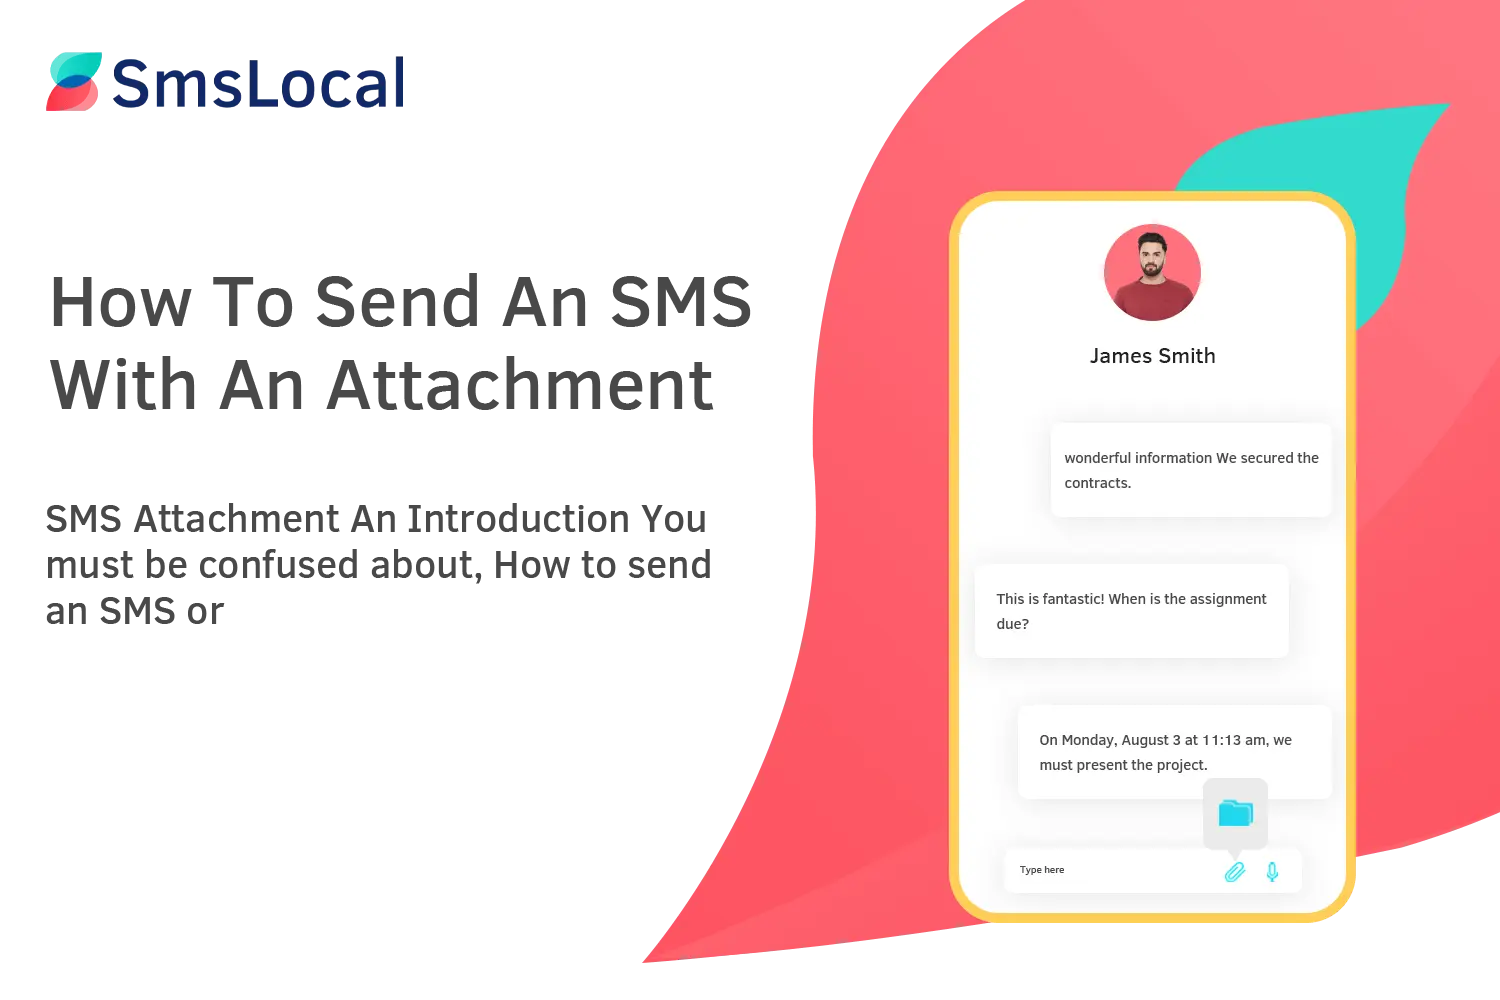 How-To-Send-An-SMS-With-An-Attachment (1)